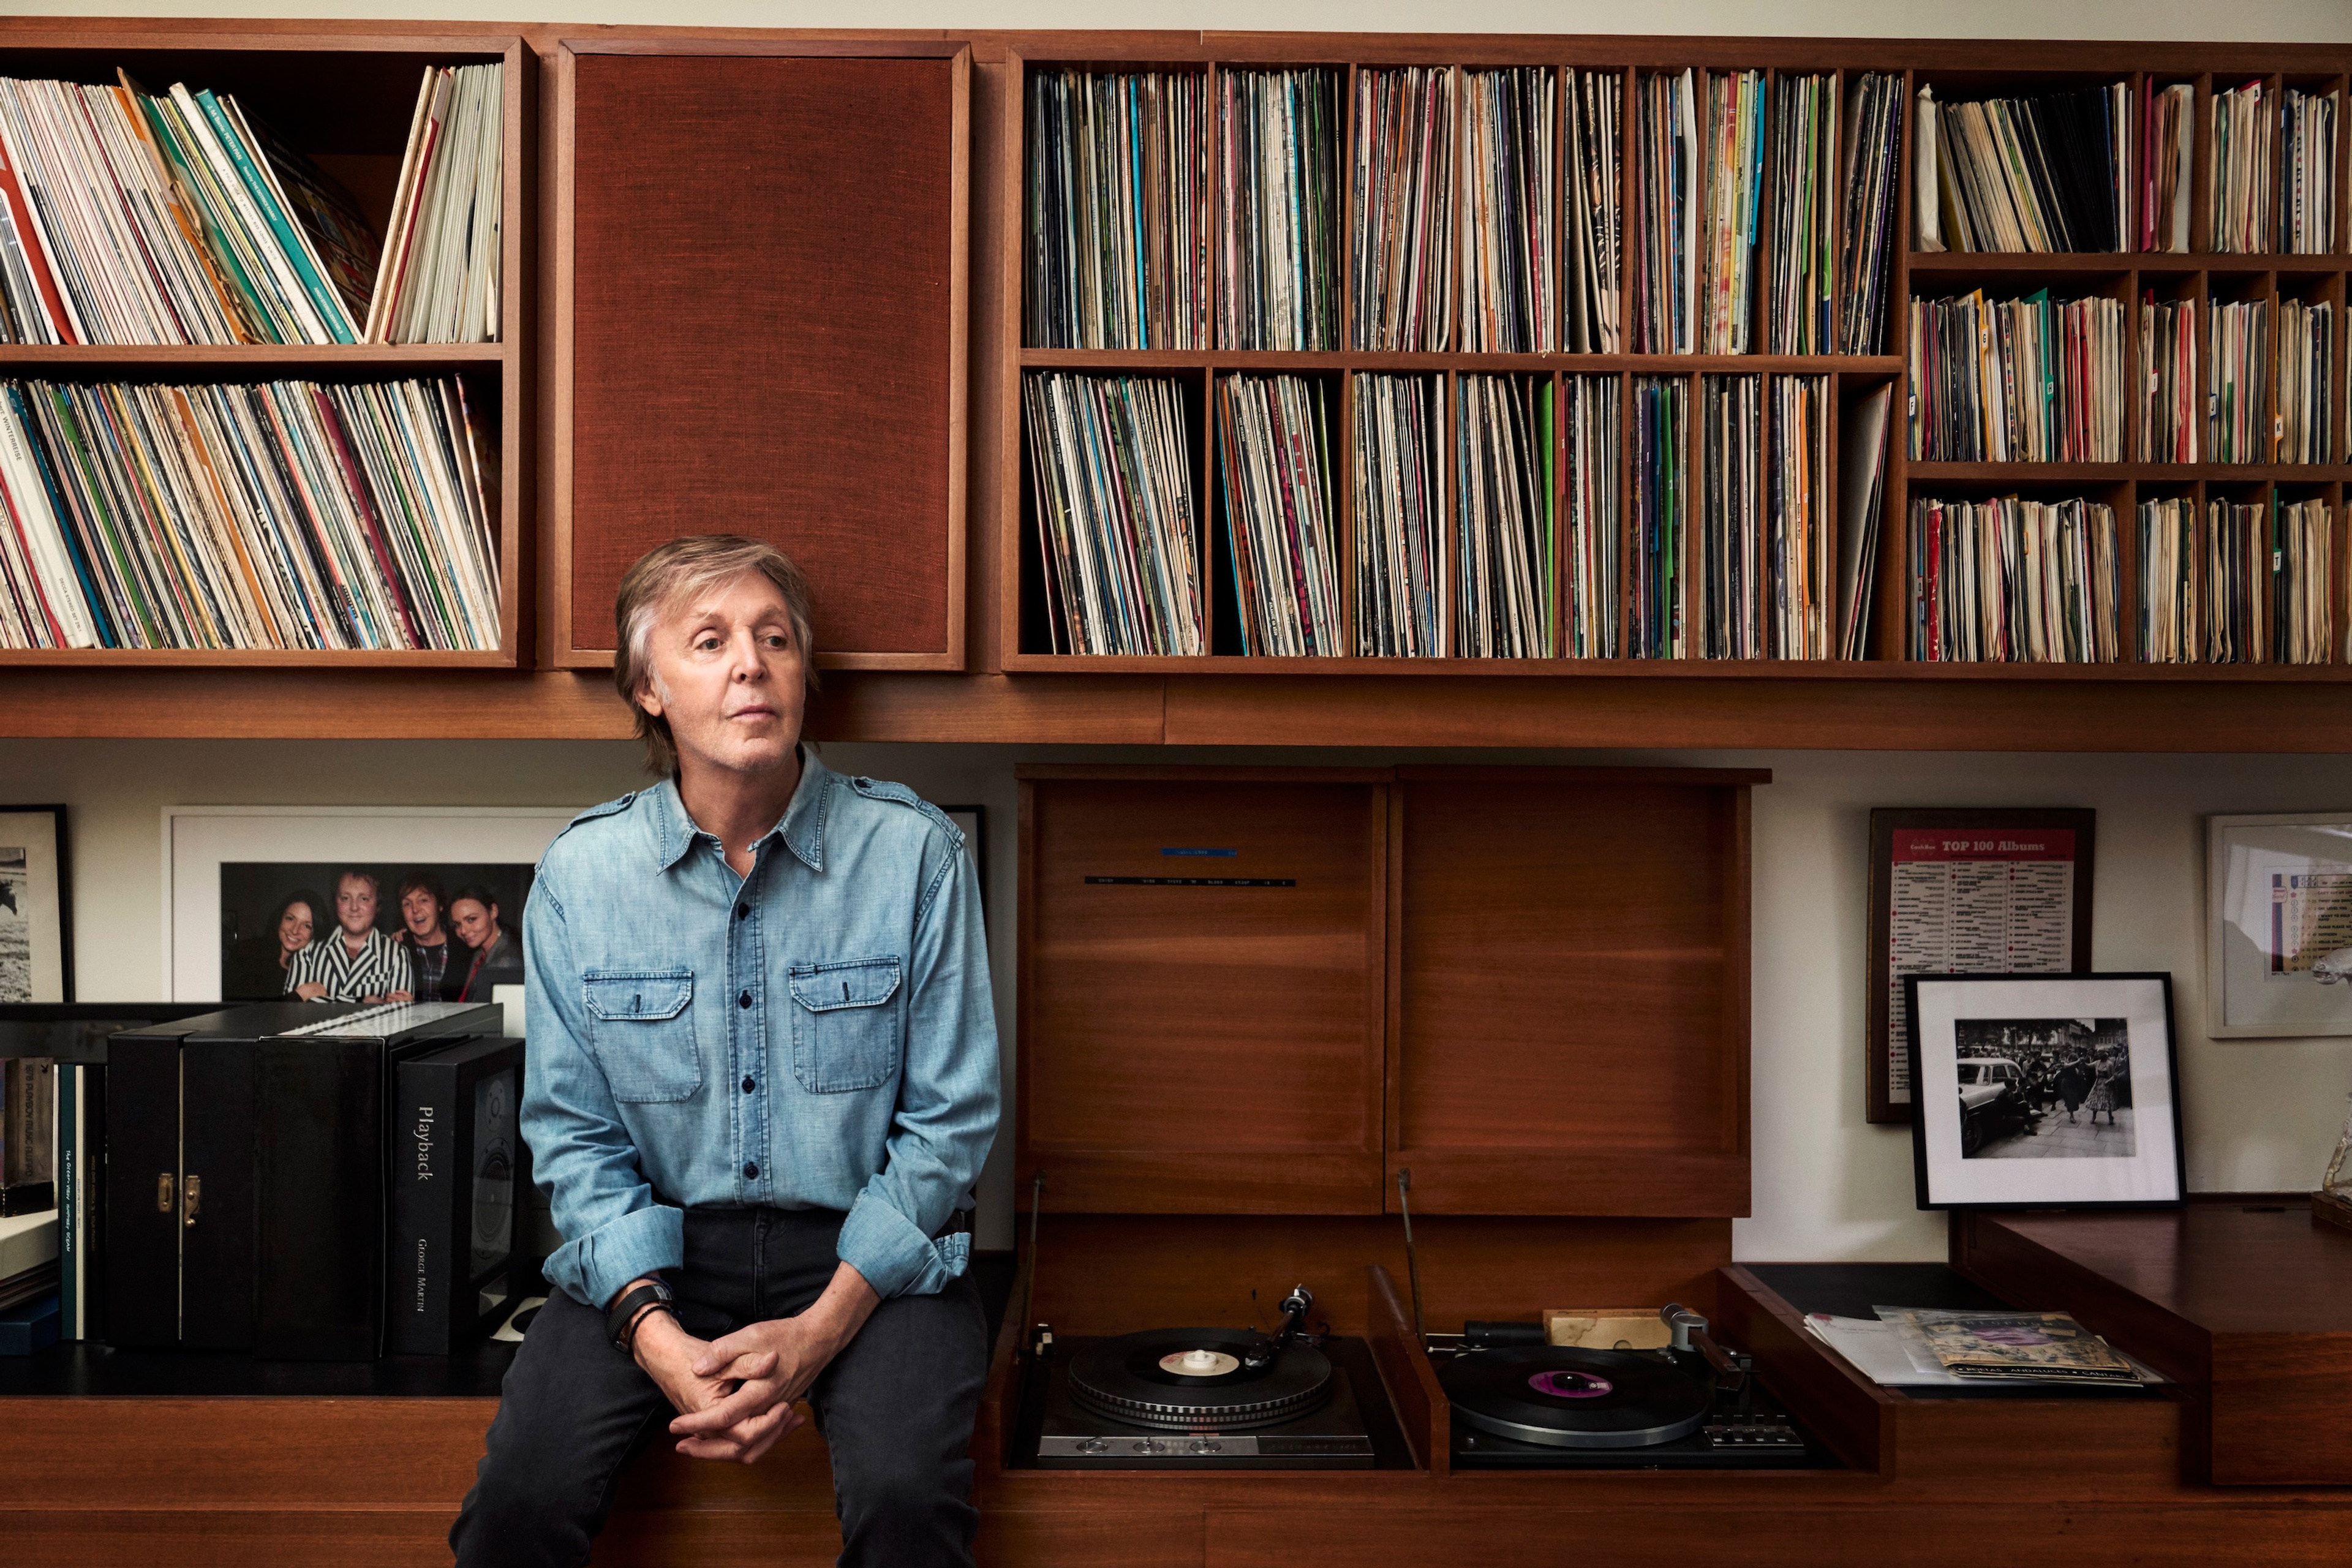 Photo of Paul at home infant of a record player looking up to the right